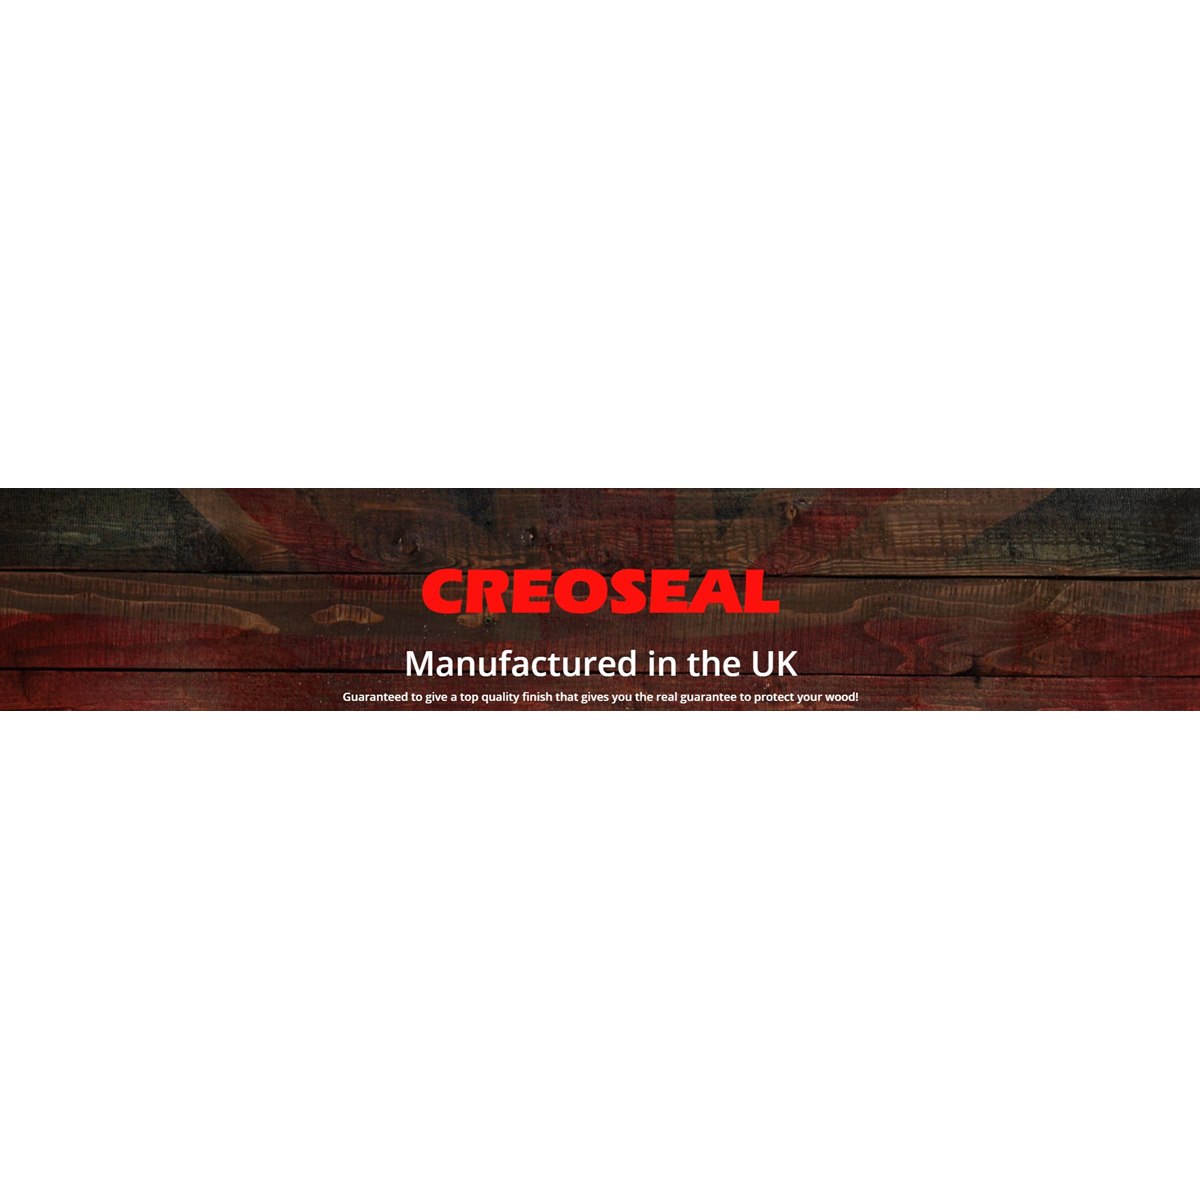 Where to Buy Creoseal